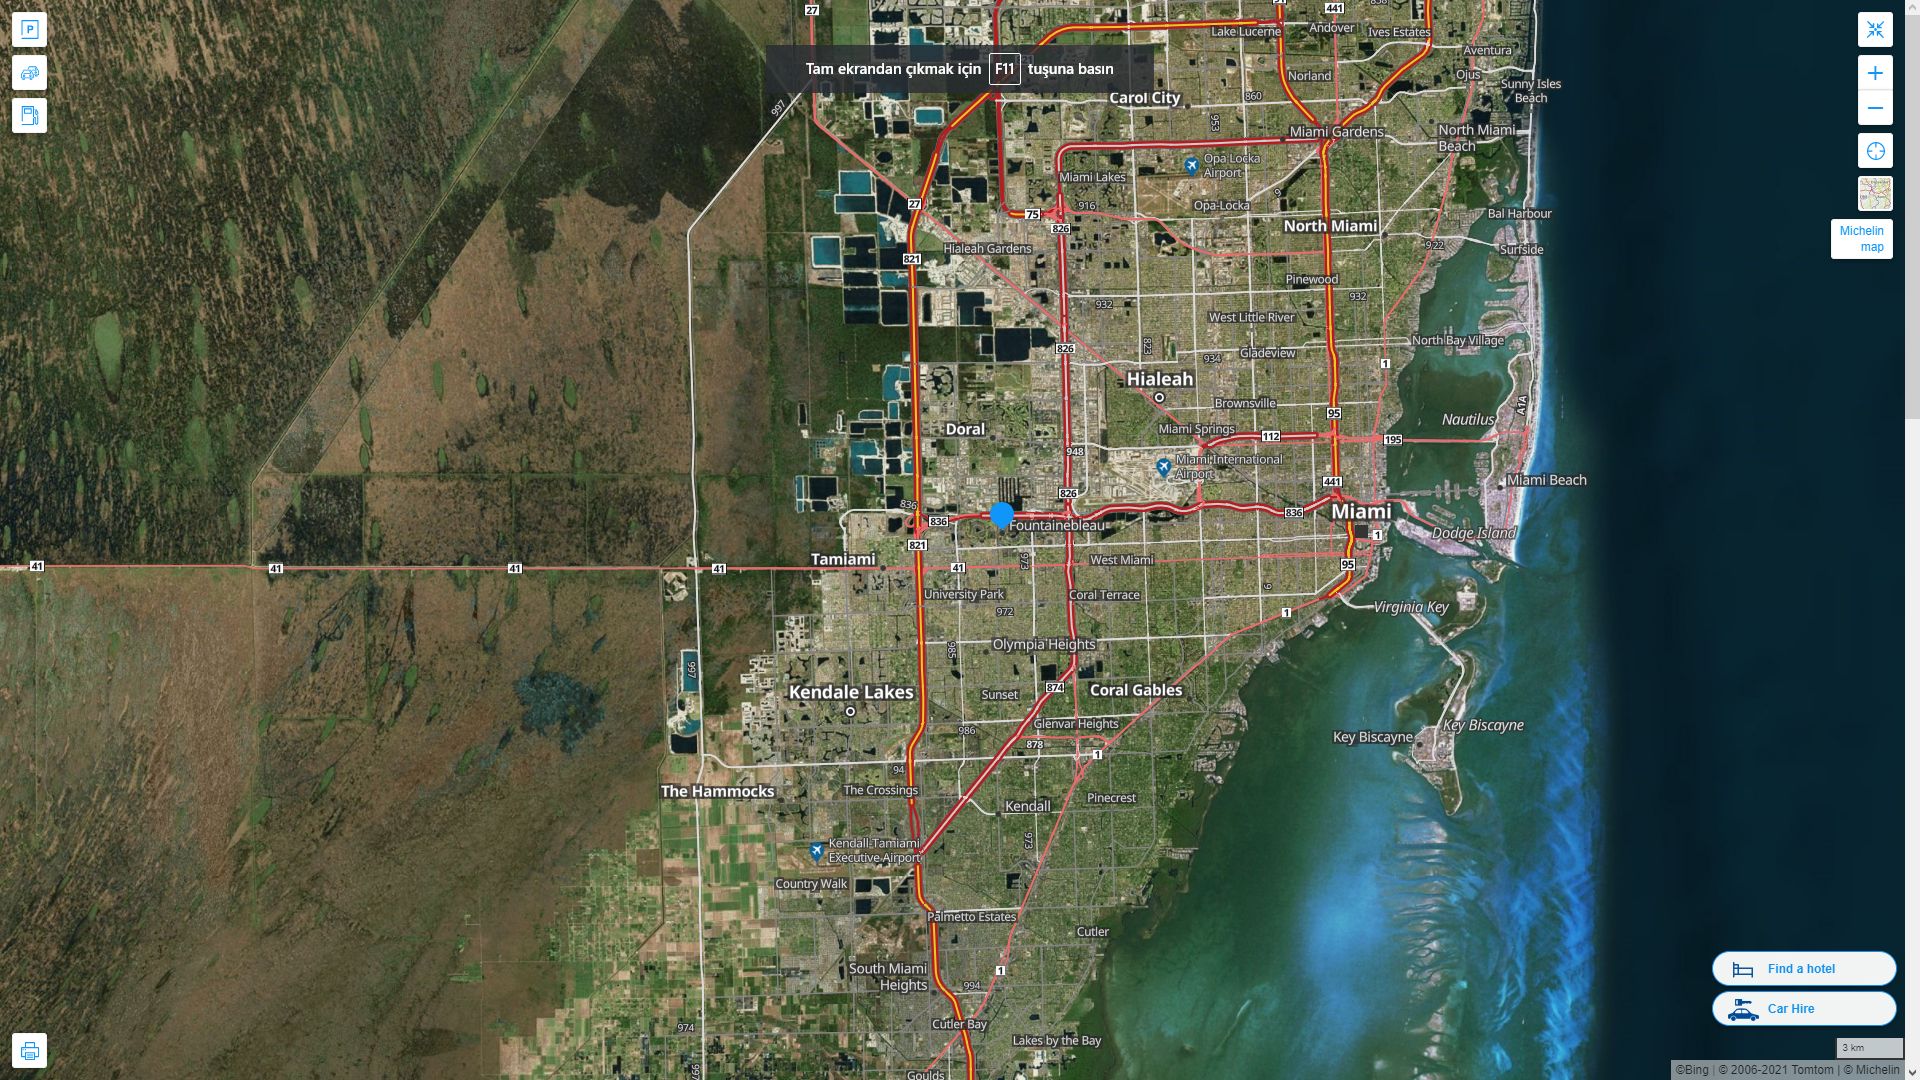 Fountainebleau Florida Highway and Road Map with Satellite View